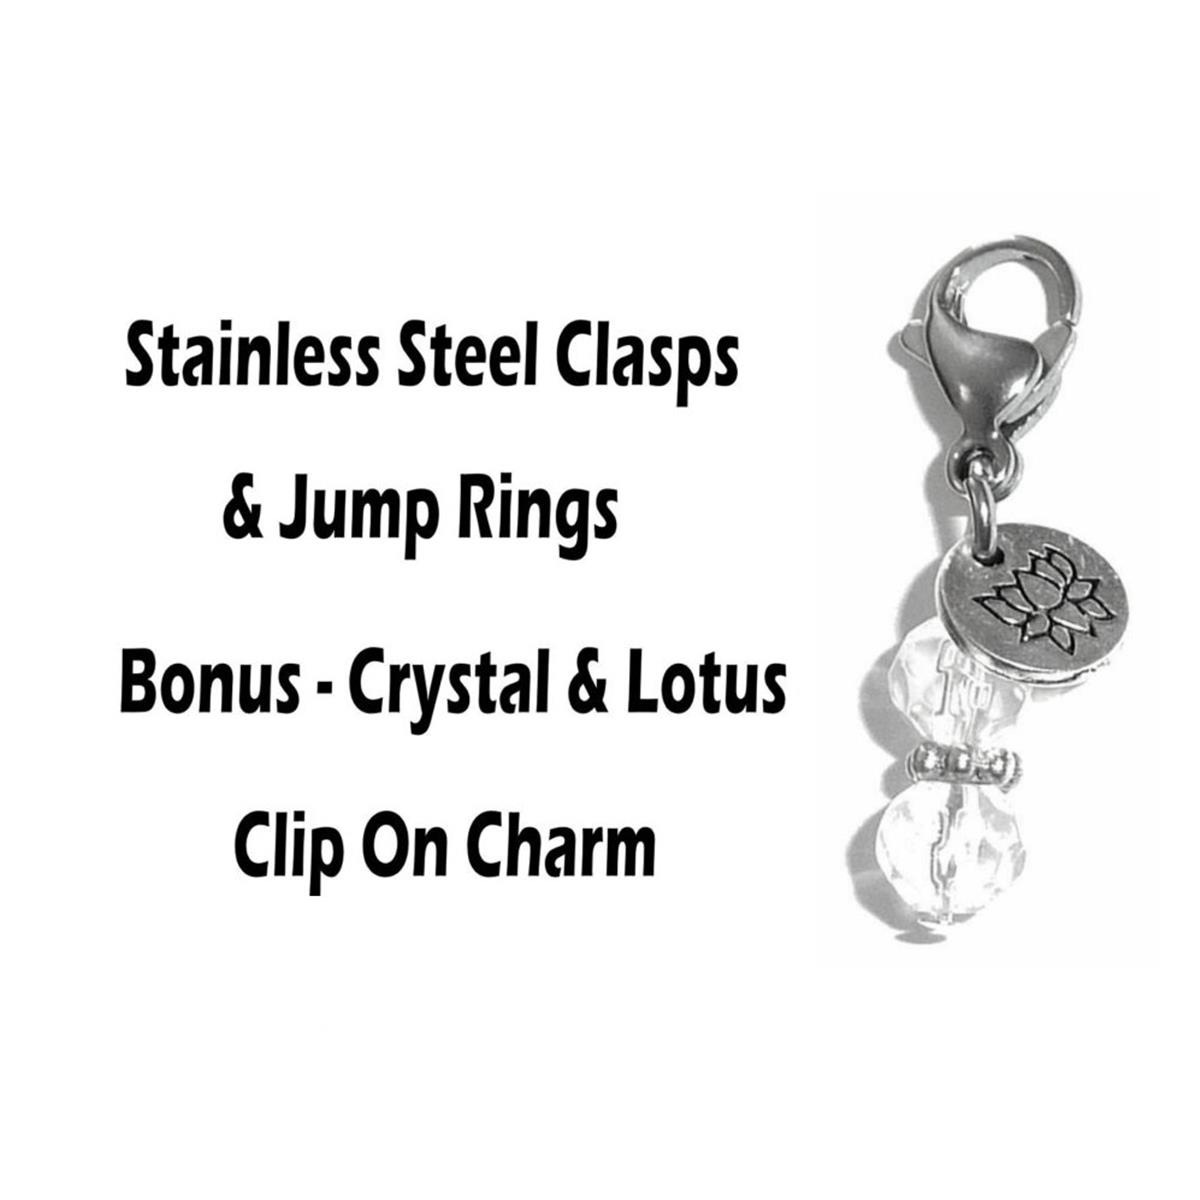 4 Pack Whimsical Clip On Charms - Whimsical Charms Clip On Anywhere